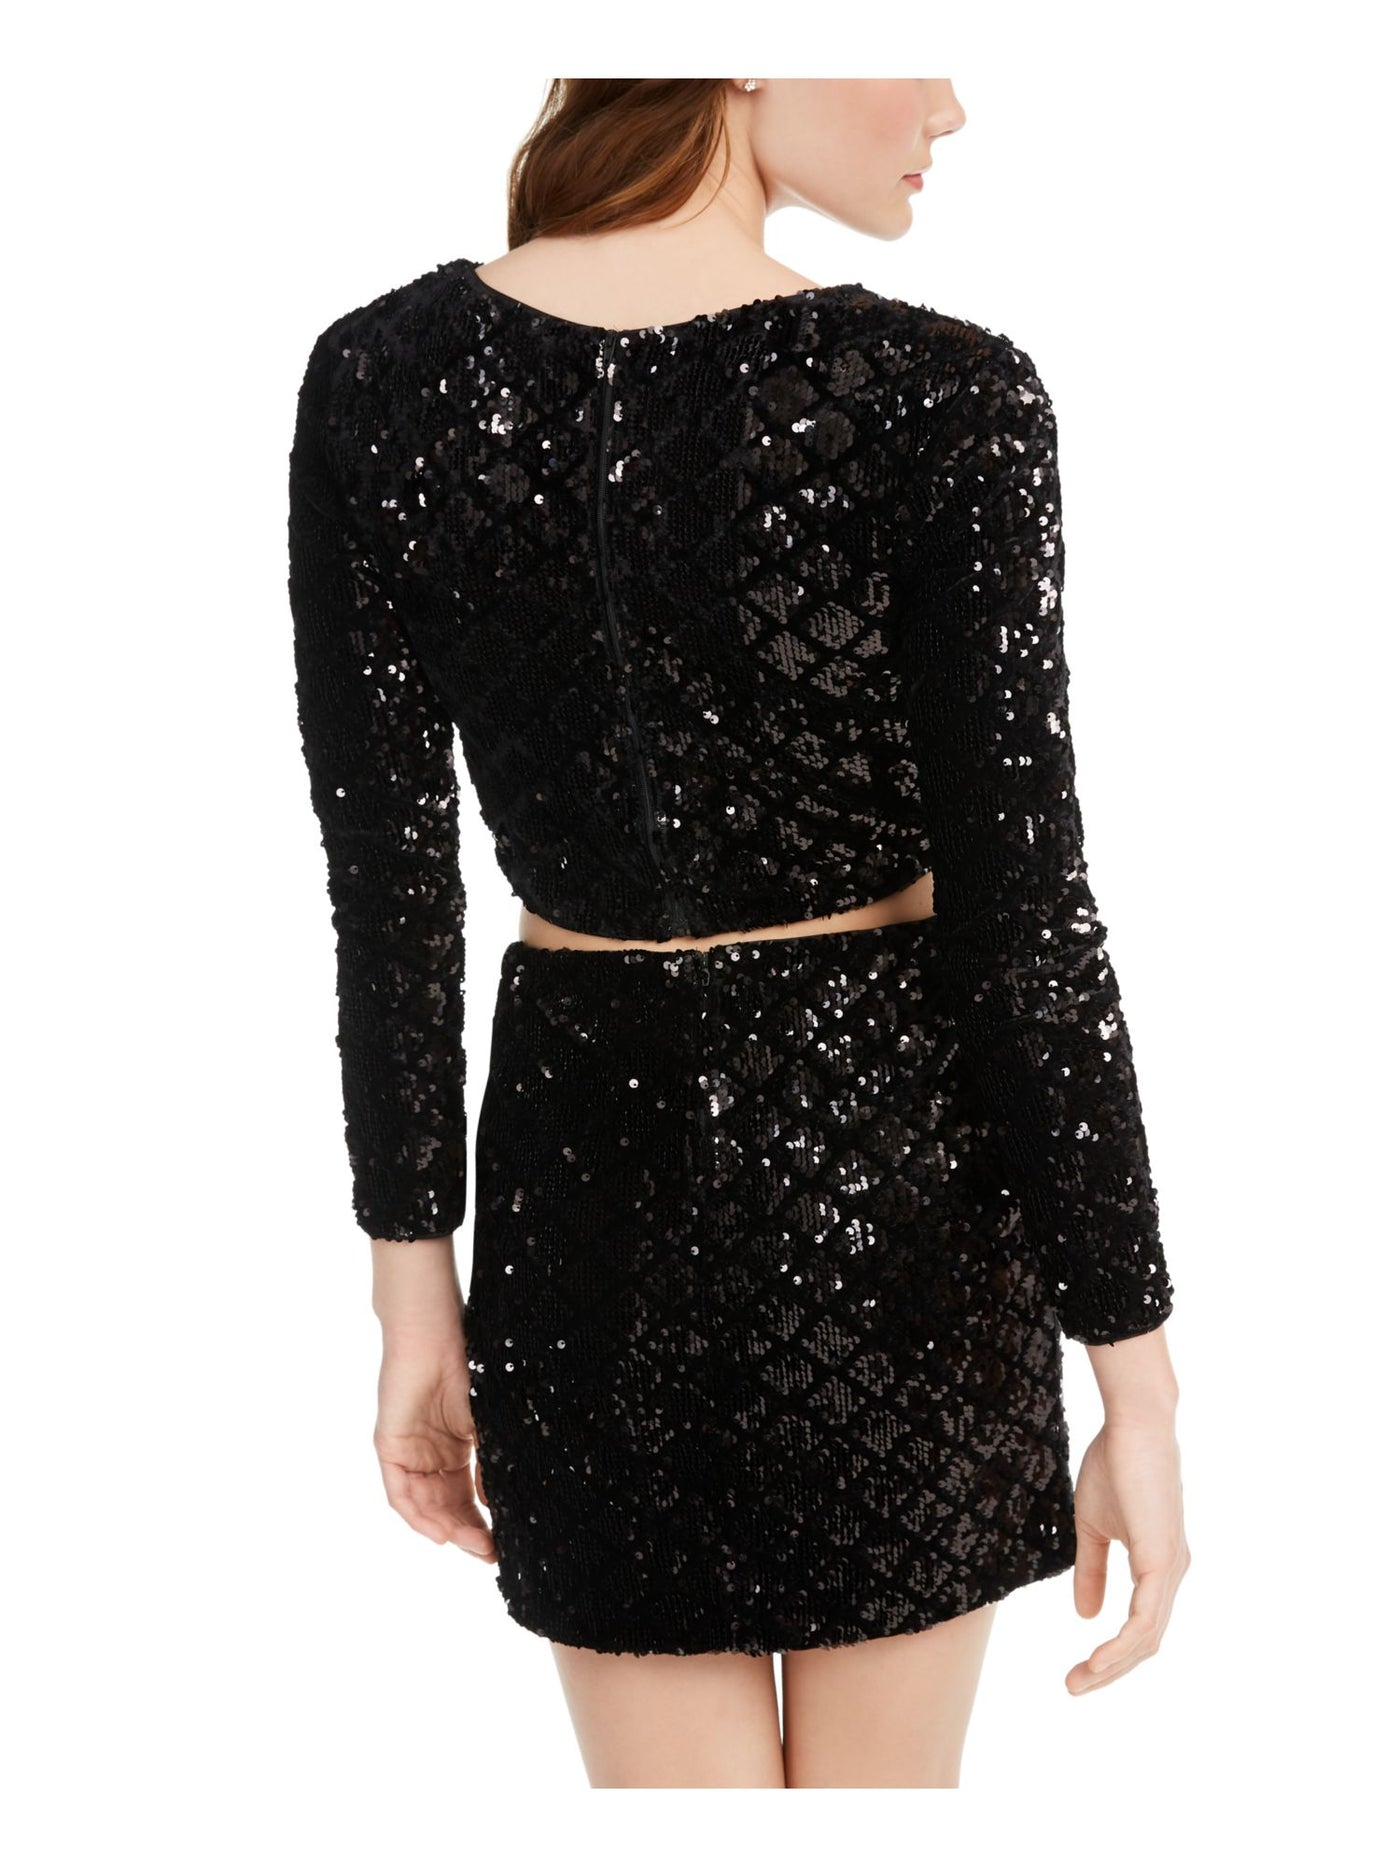 CRYSTAL DOLLS Womens Sequined With Pencil Skirt 3/4 Sleeve Jewel Neck Cocktail Crop Top